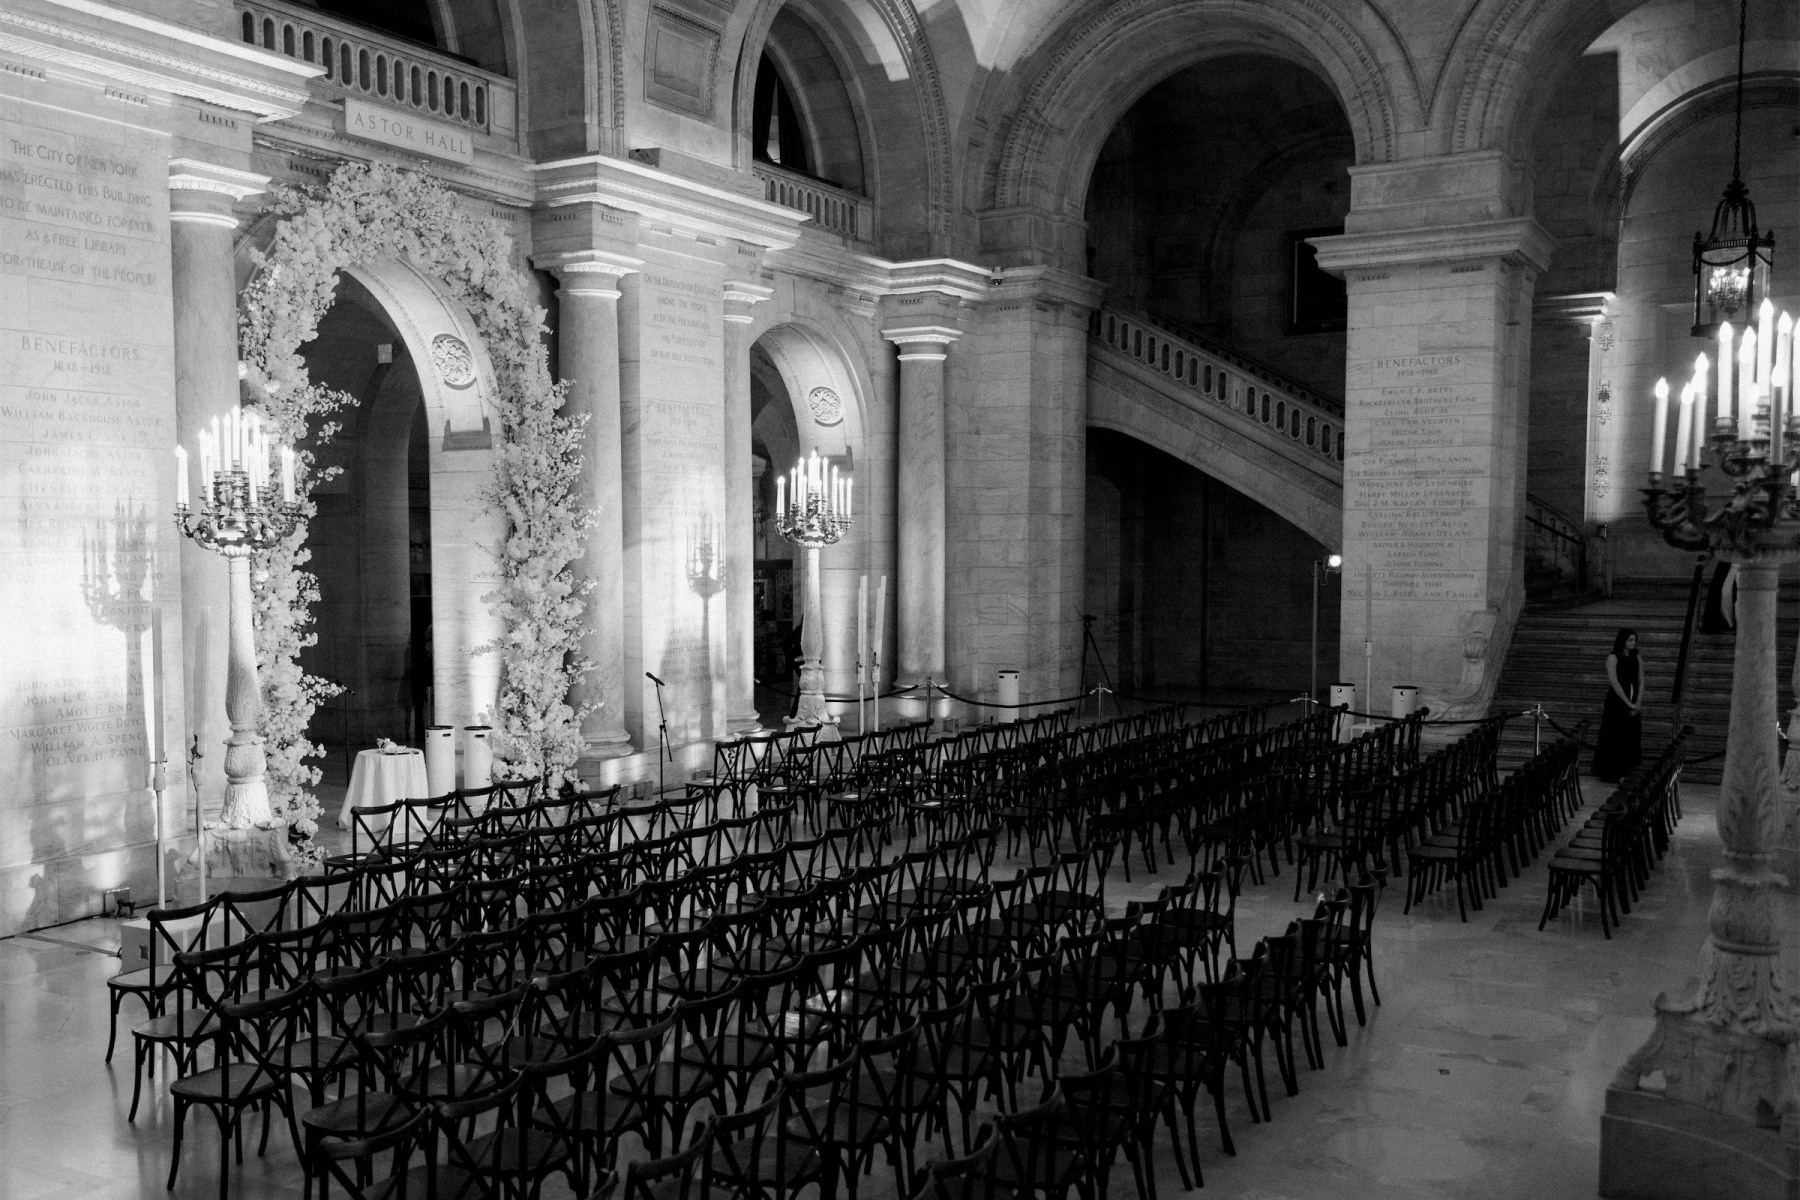 Celebrity Wedding: An evening indoor wedding setup in the New York Public Library. 